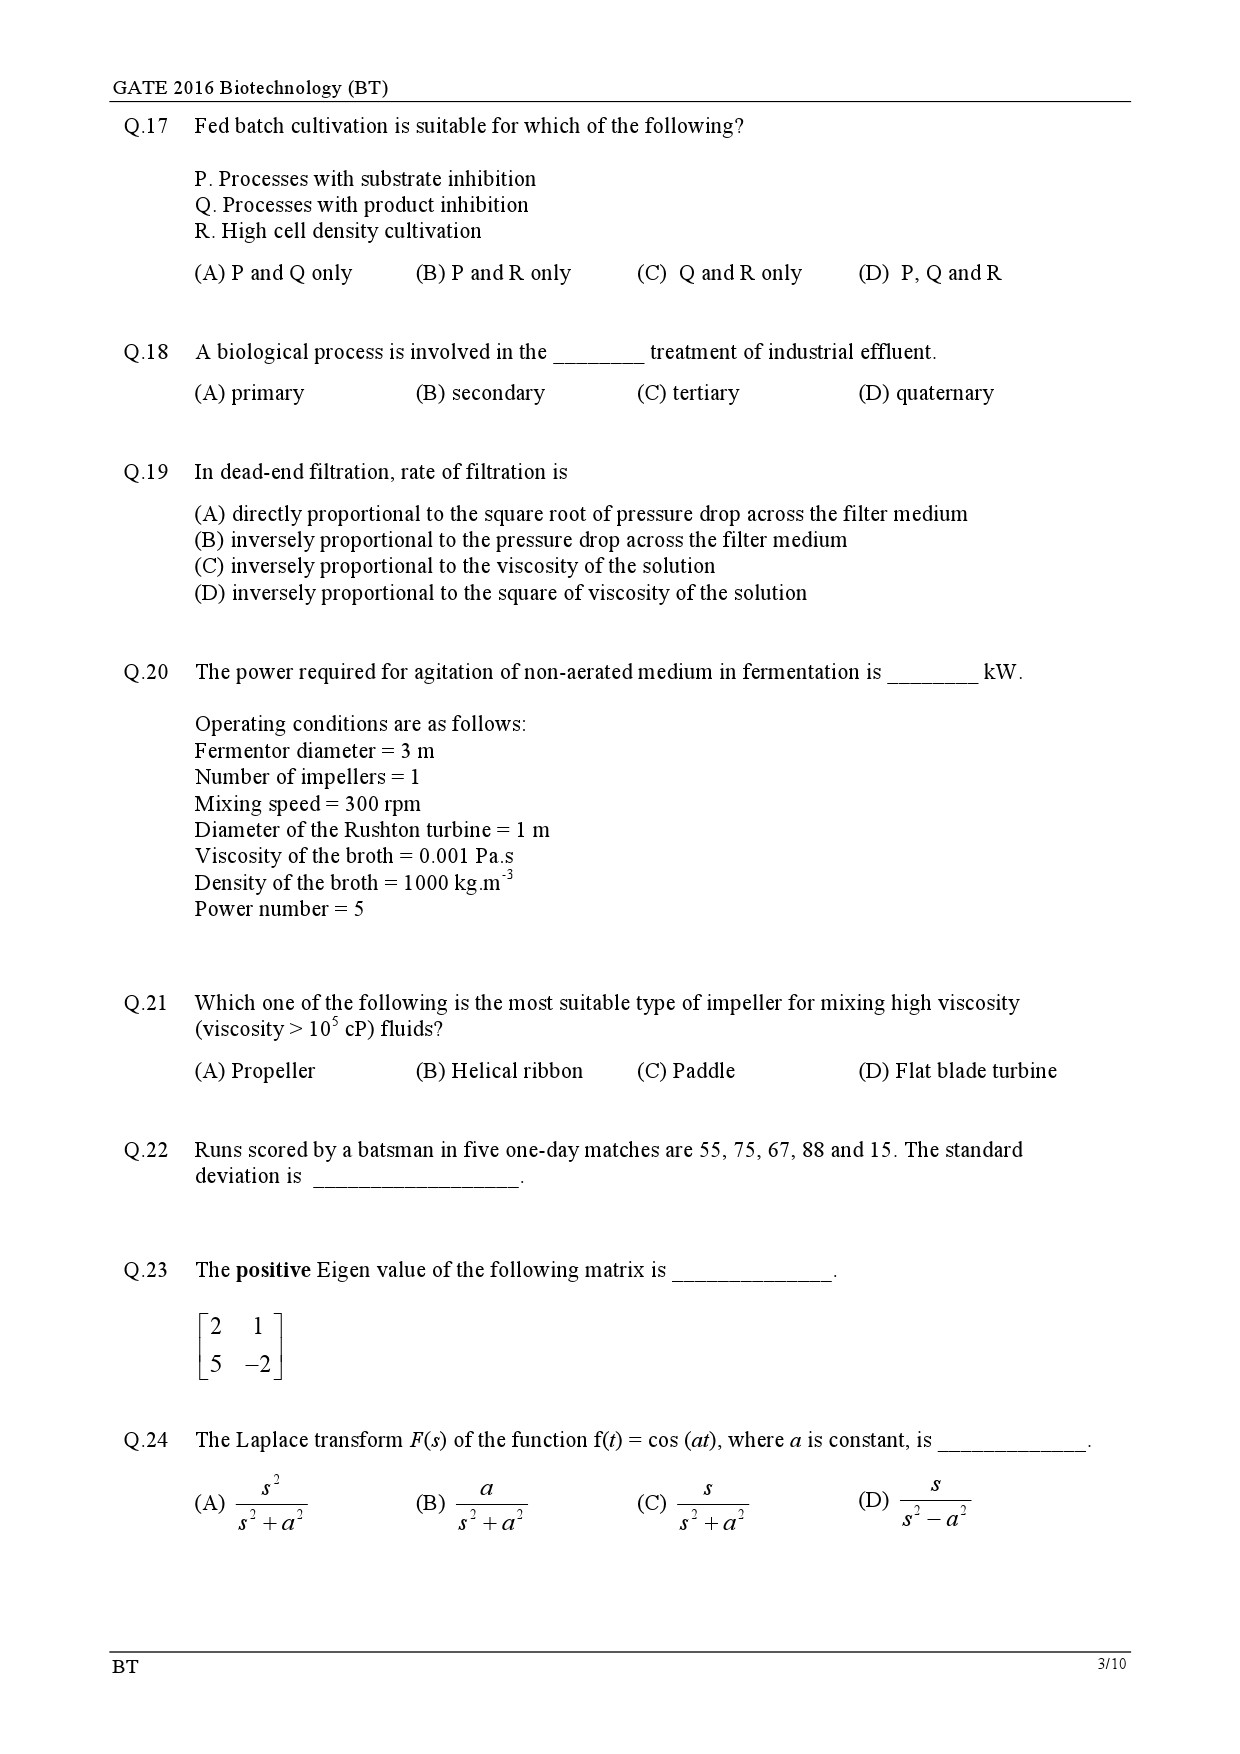 GATE Exam Question Paper 2016 Biotechnology 6